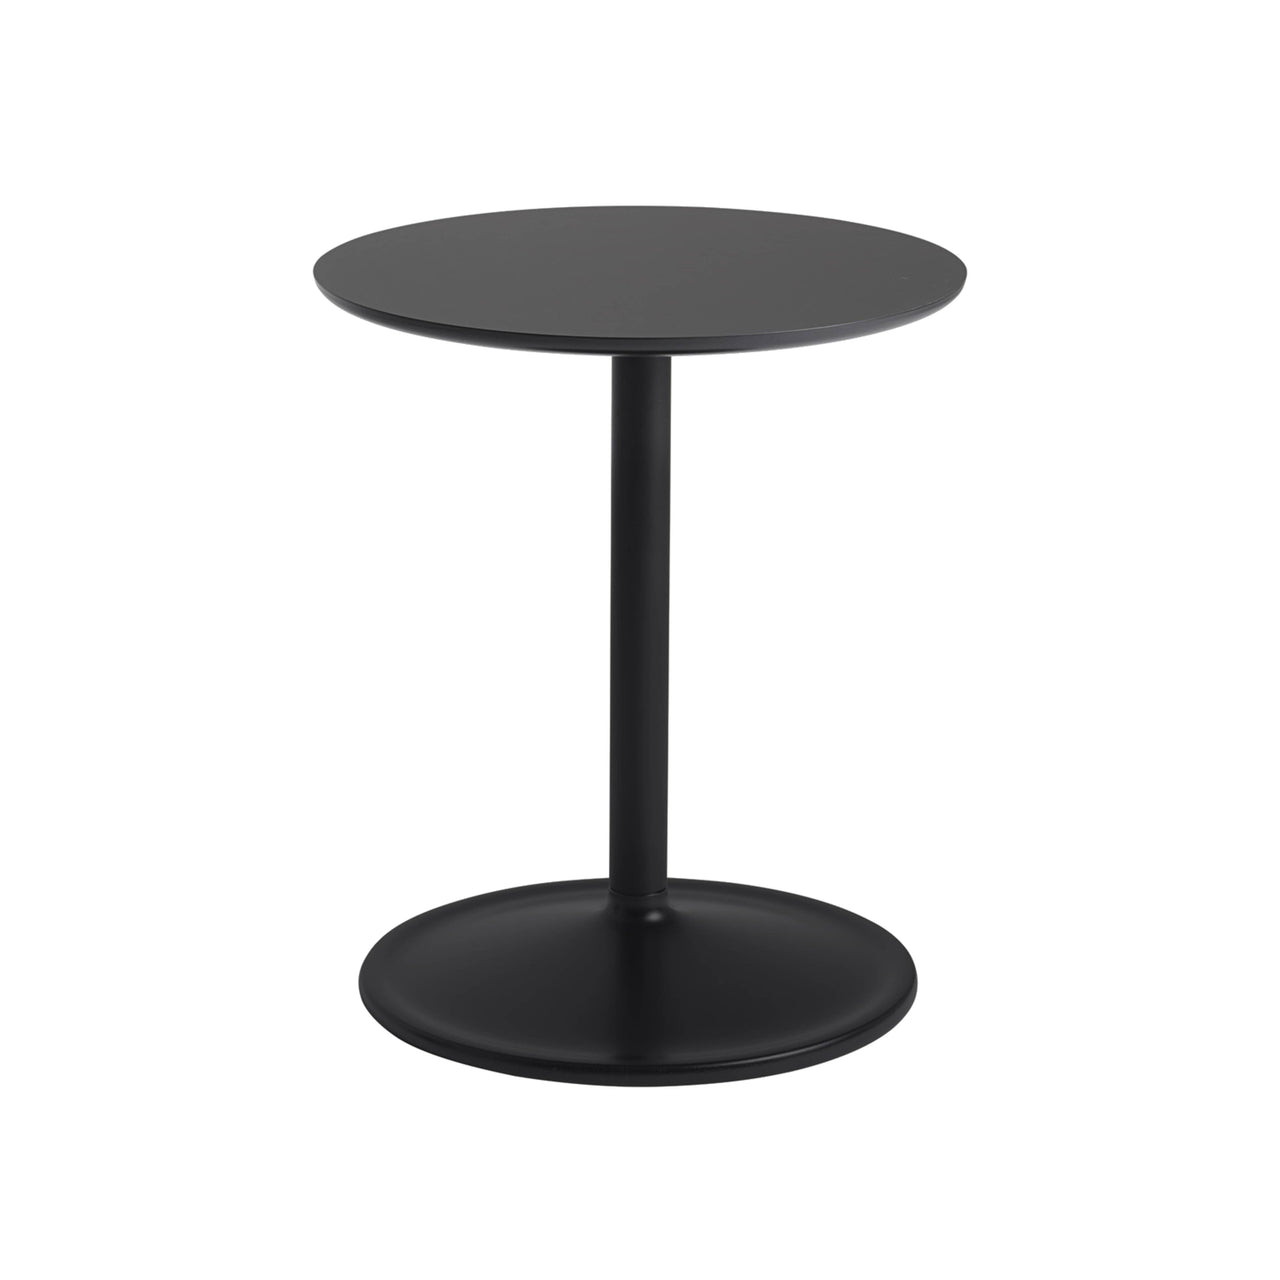 Soft Side Table: Small - 16.1